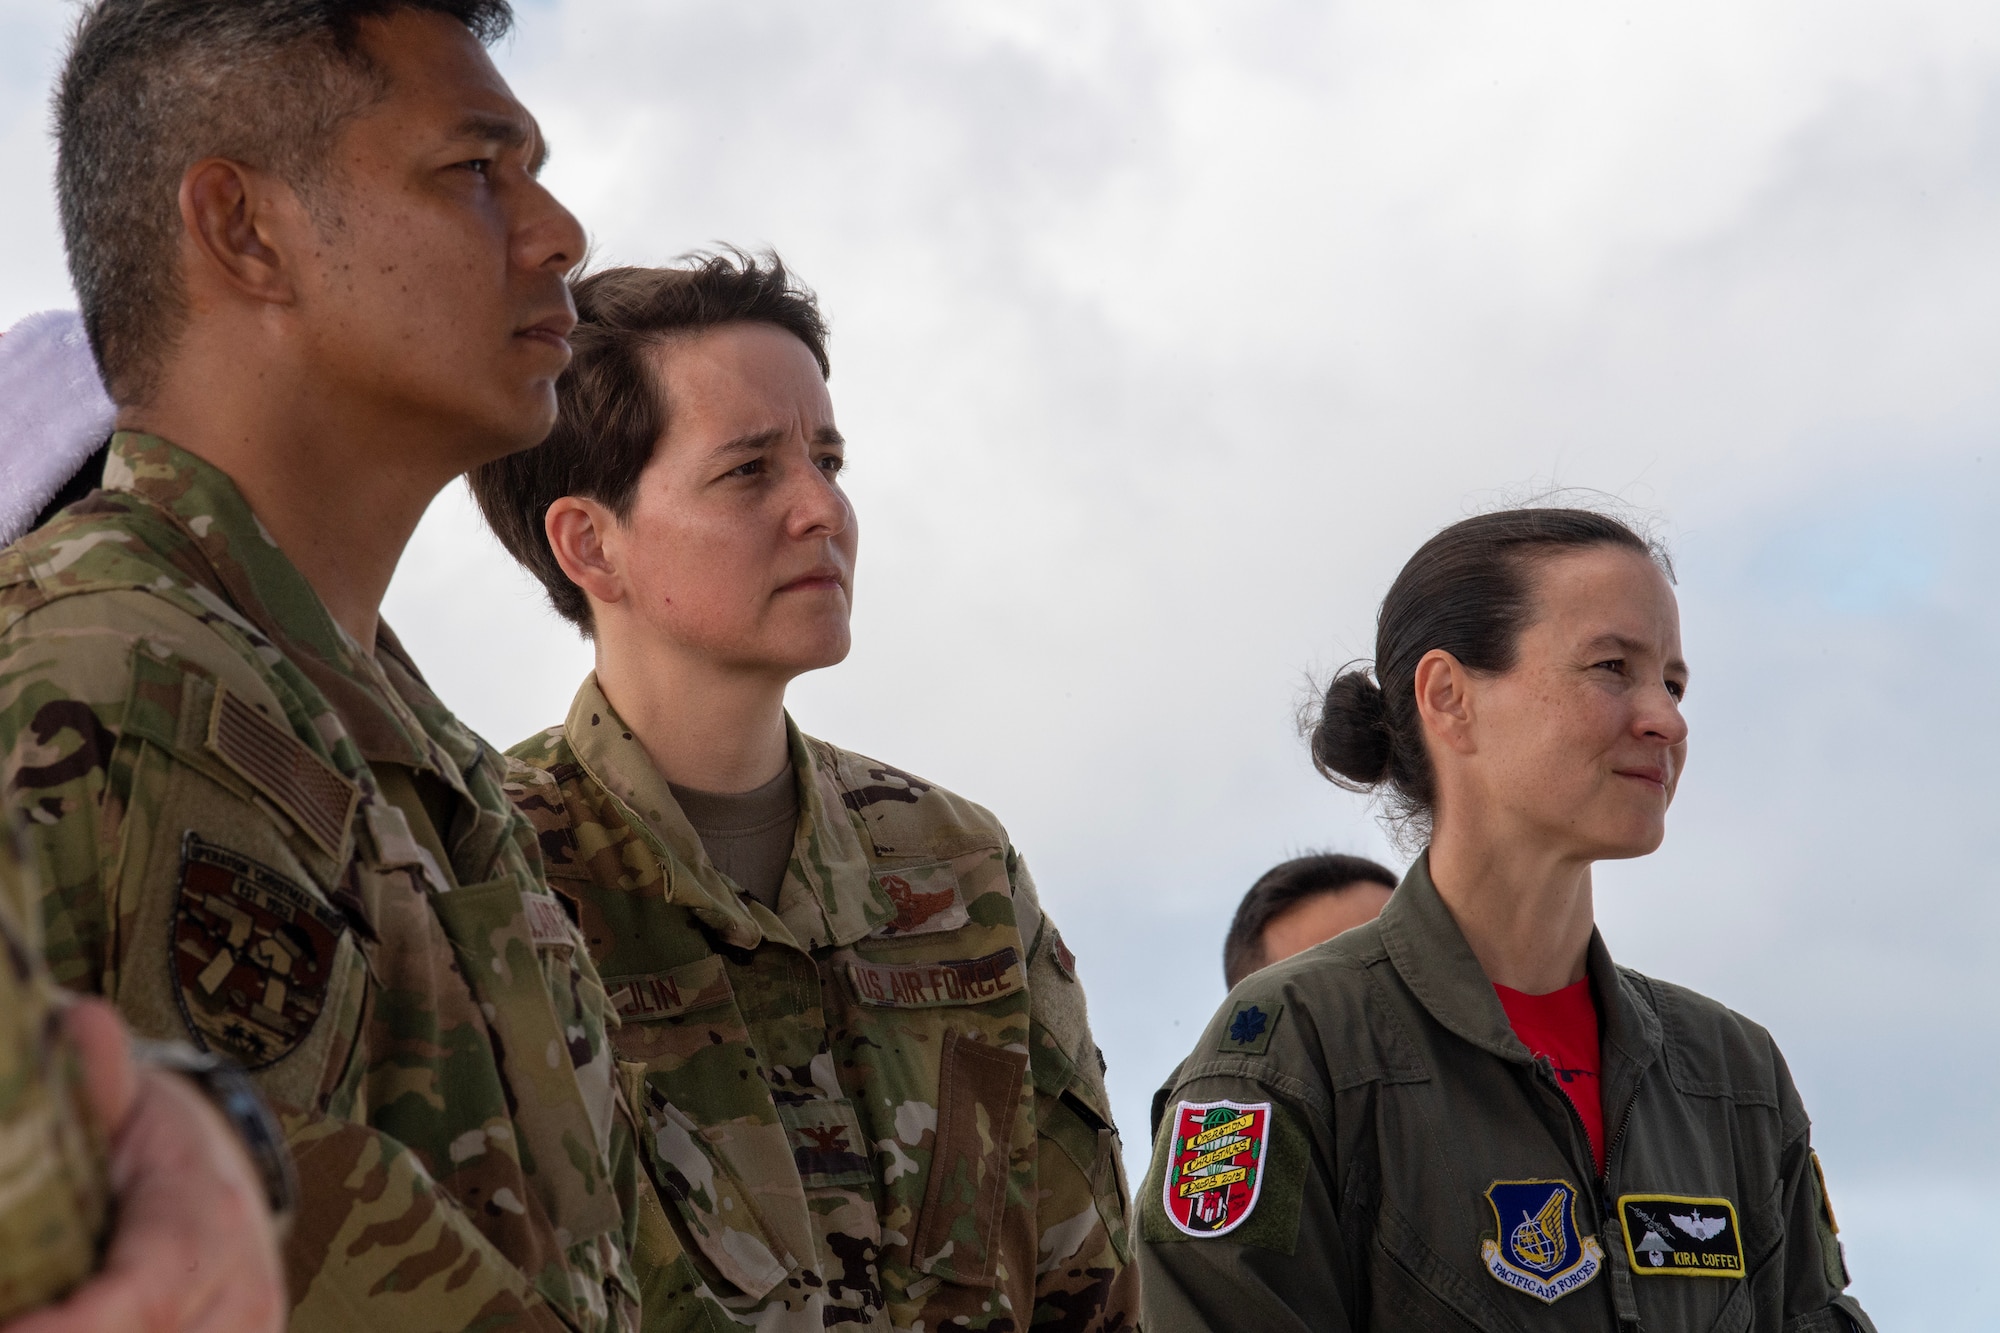 U.S. Air Force Airmen listen to remarks during a memorial ceremony